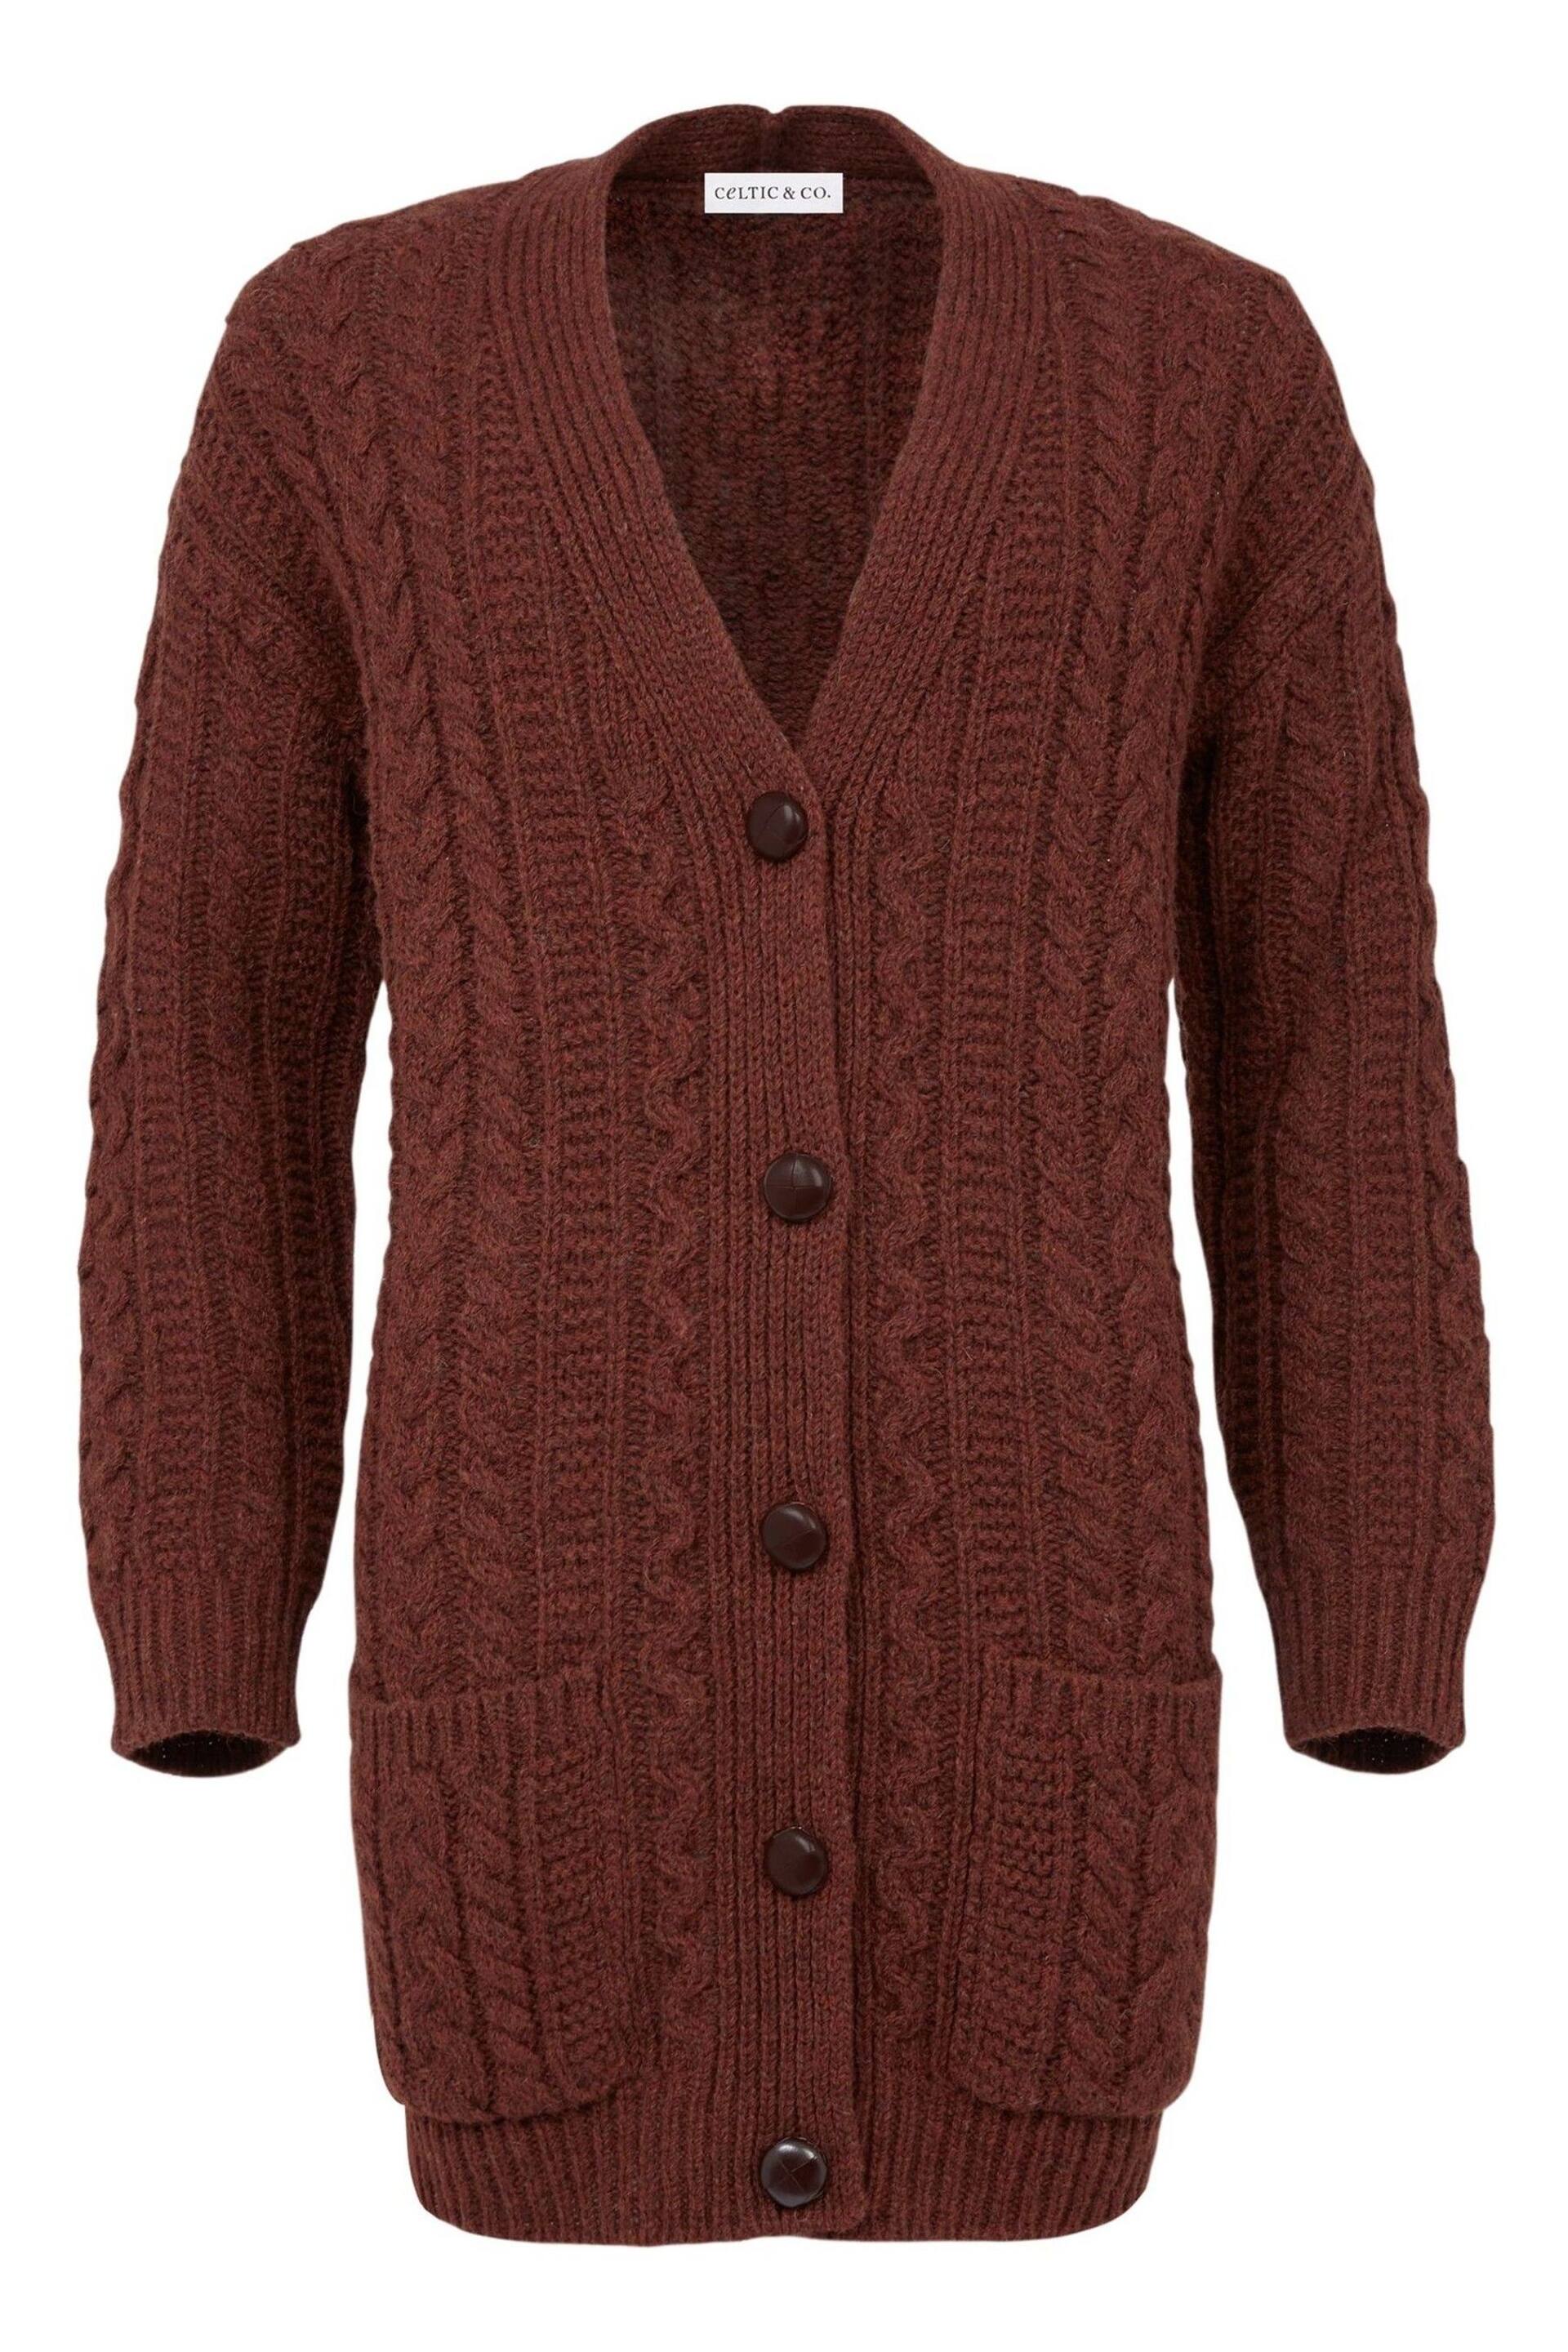 Celtic & Co. Cable Boyfriend Brown Cardigan - Image 2 of 7